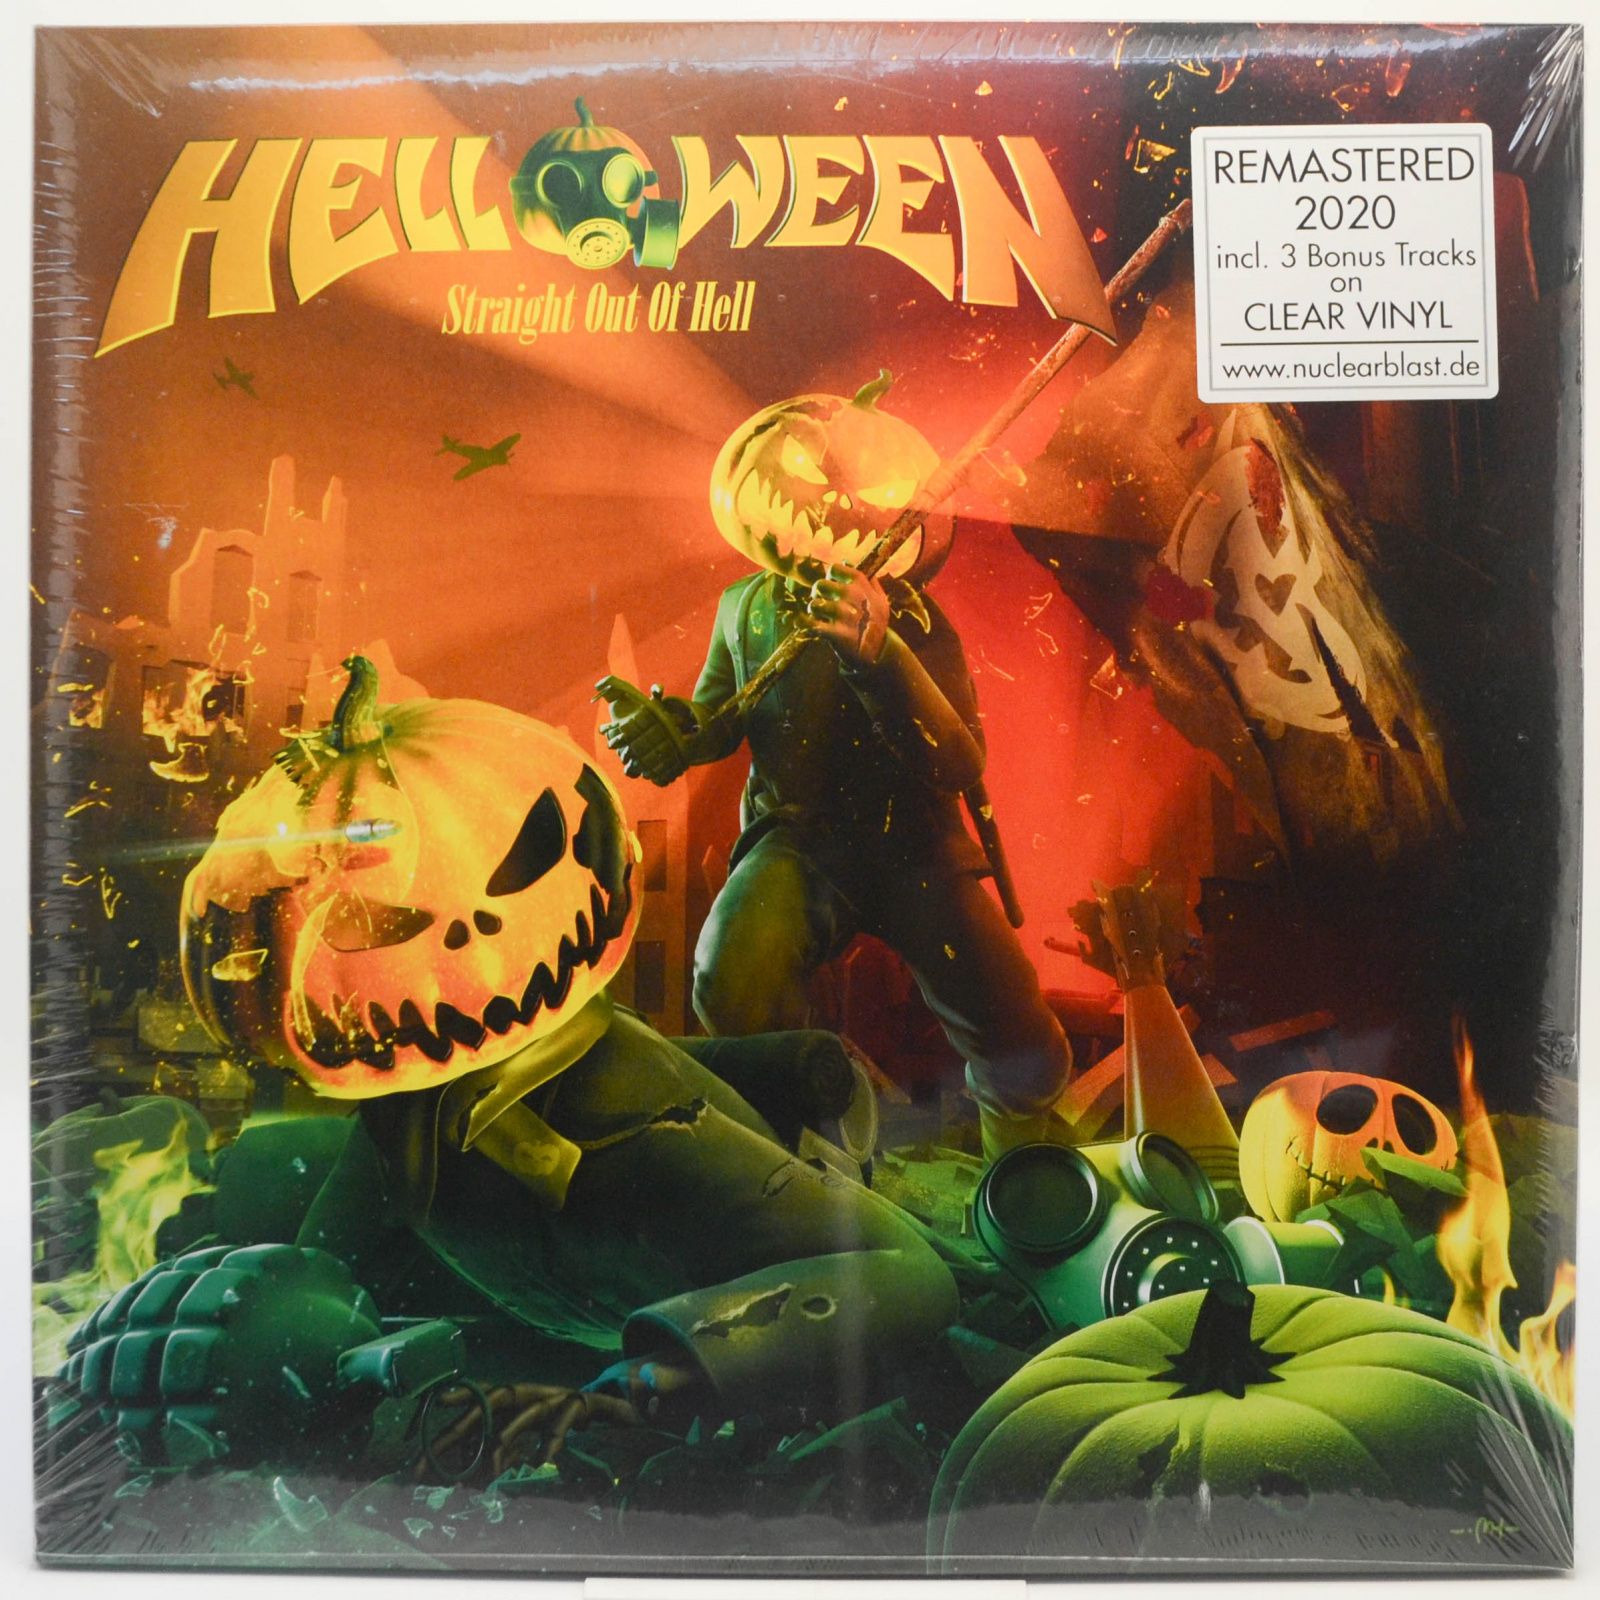 Straight Out Of Hell (2LP), 2013